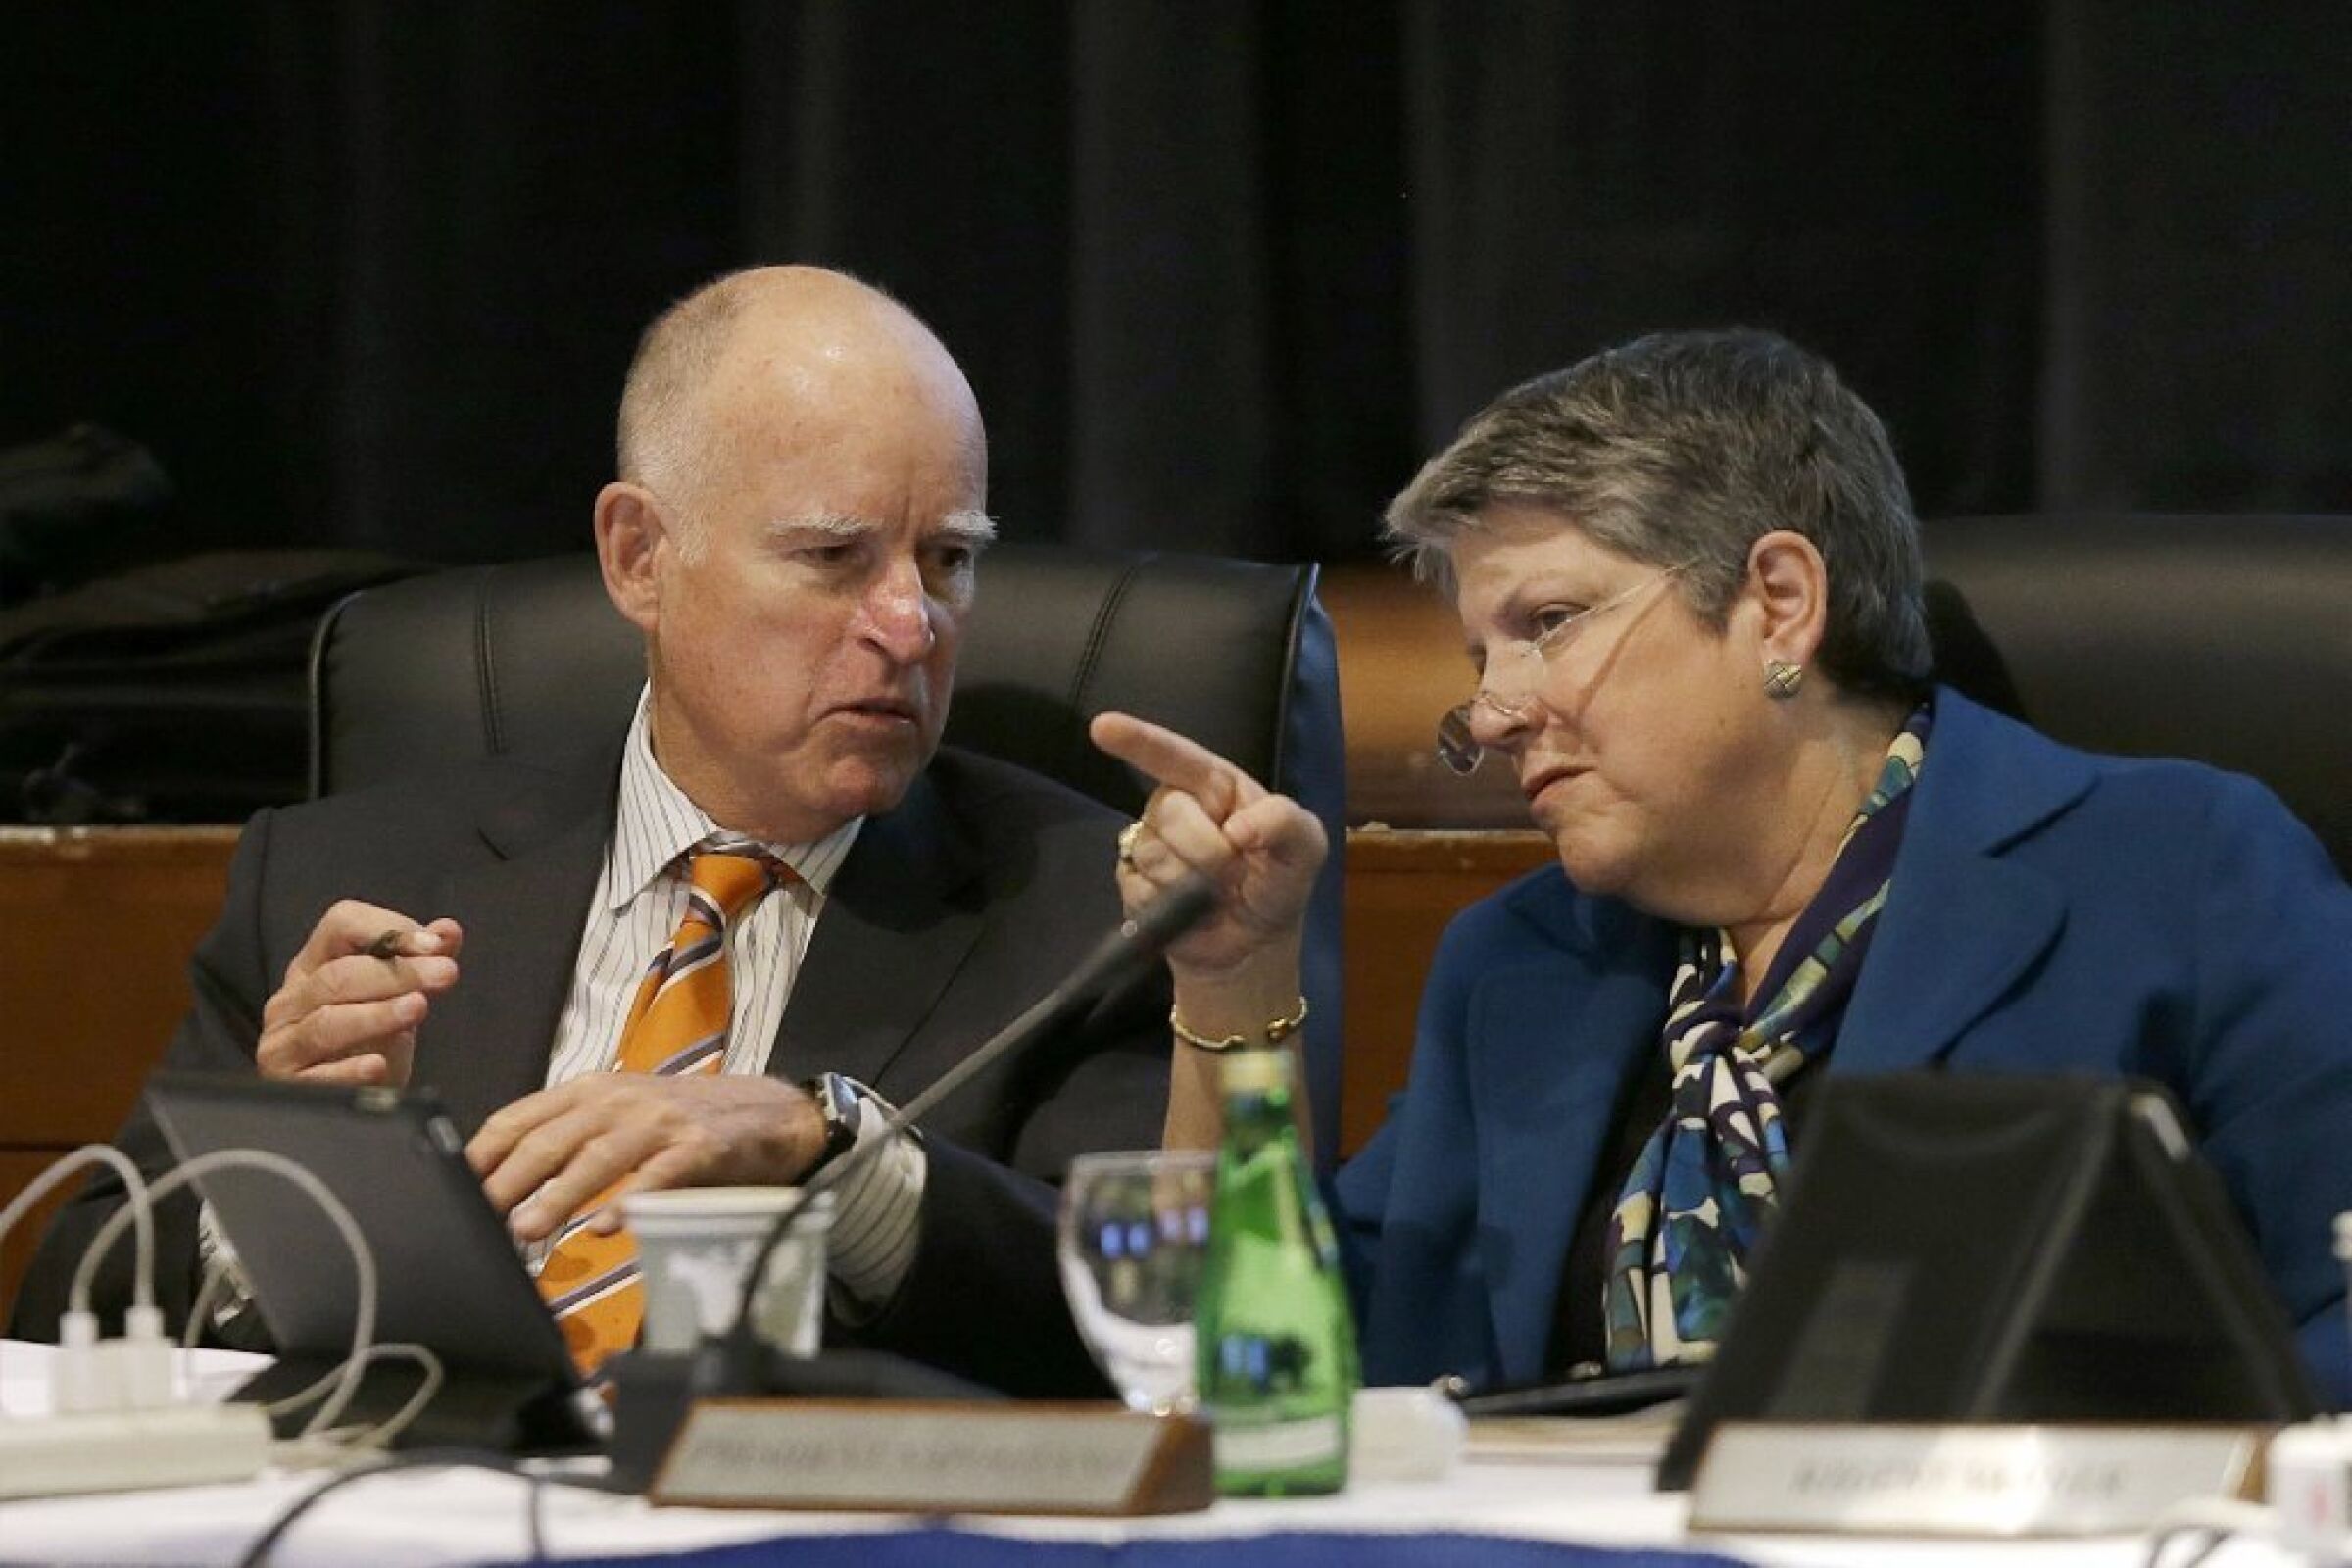 UC President Janet Napolitano talks with Gov. Jerry Brown during a March 2015 Board of Regents meeting in San Francisco.